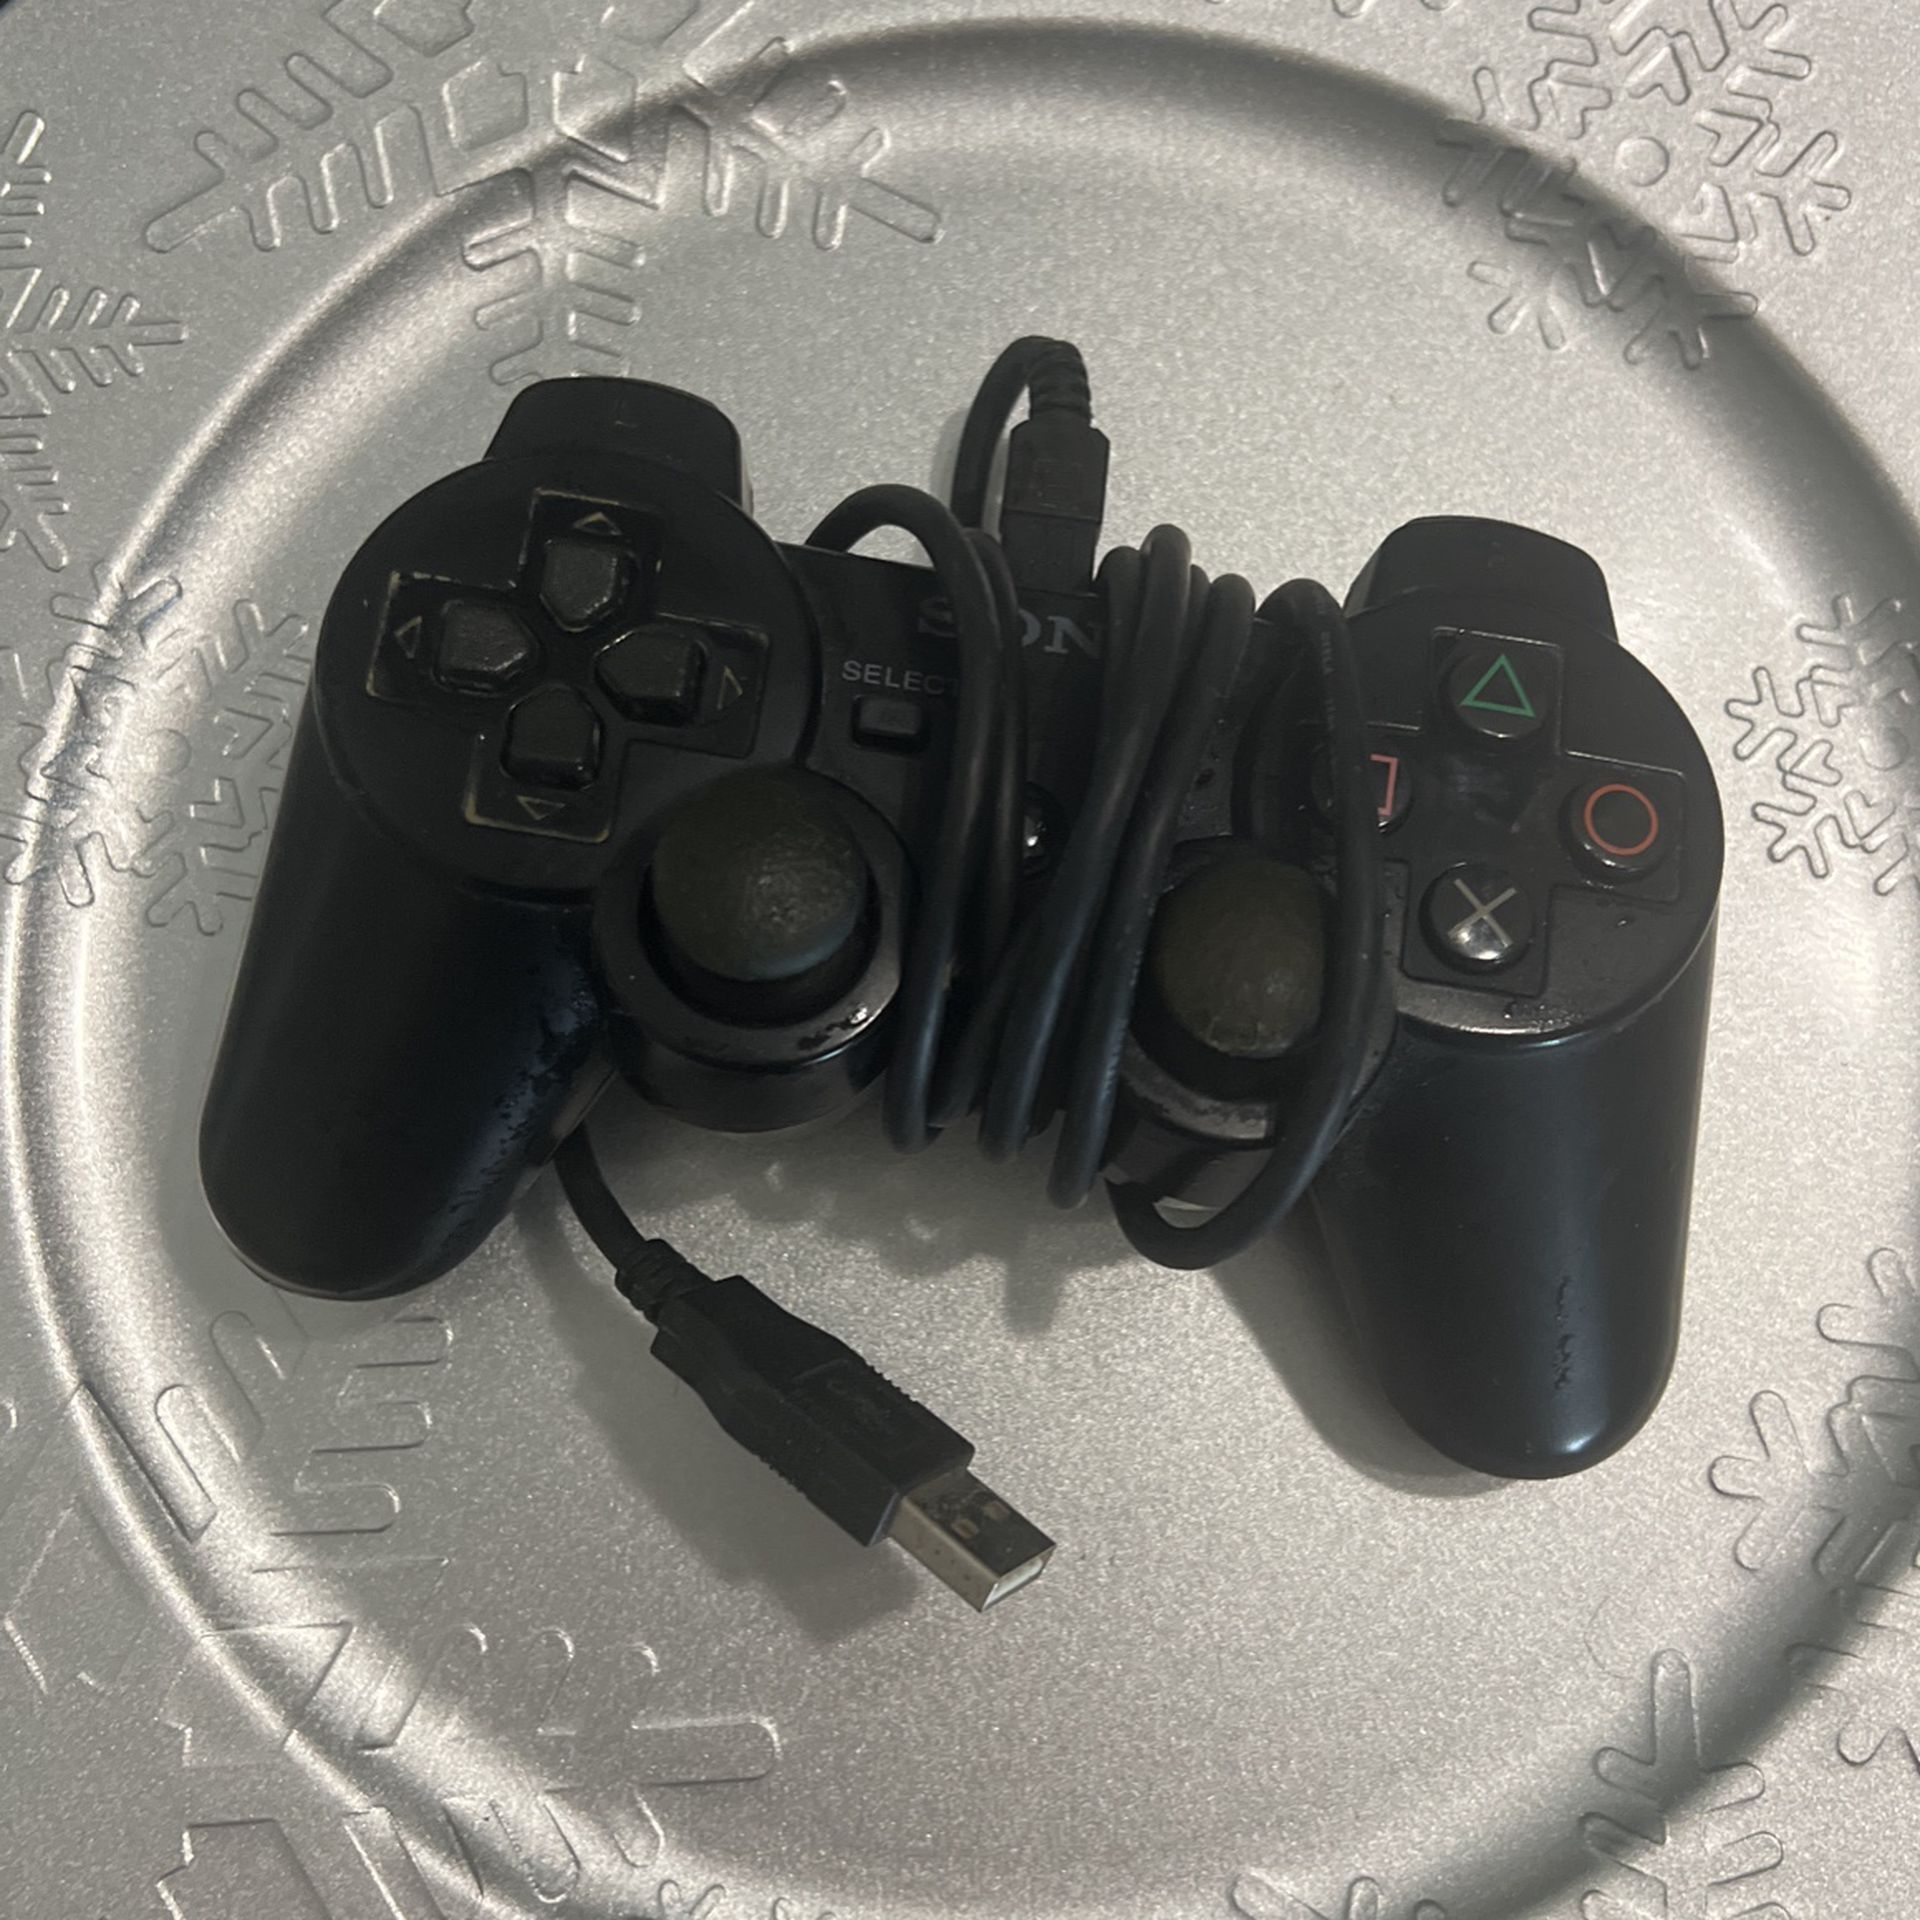 Sony Playstation Controller 